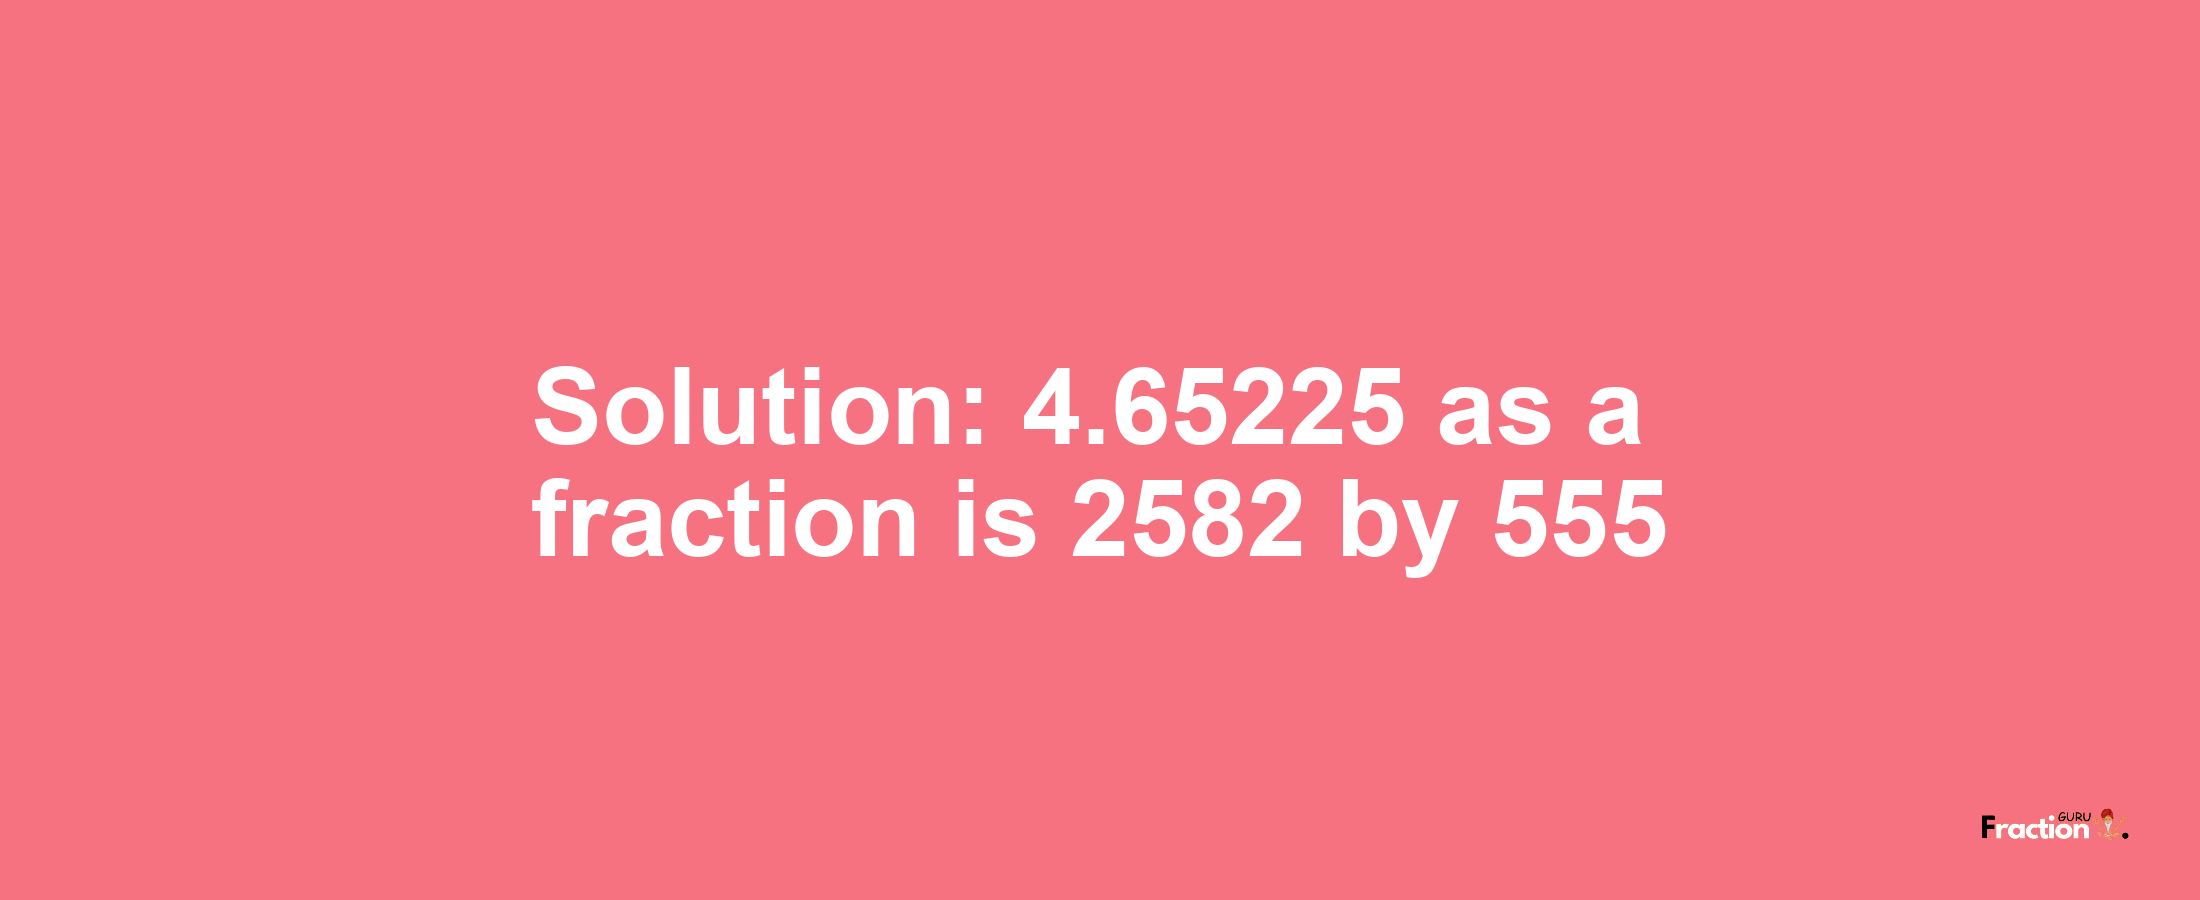 Solution:4.65225 as a fraction is 2582/555